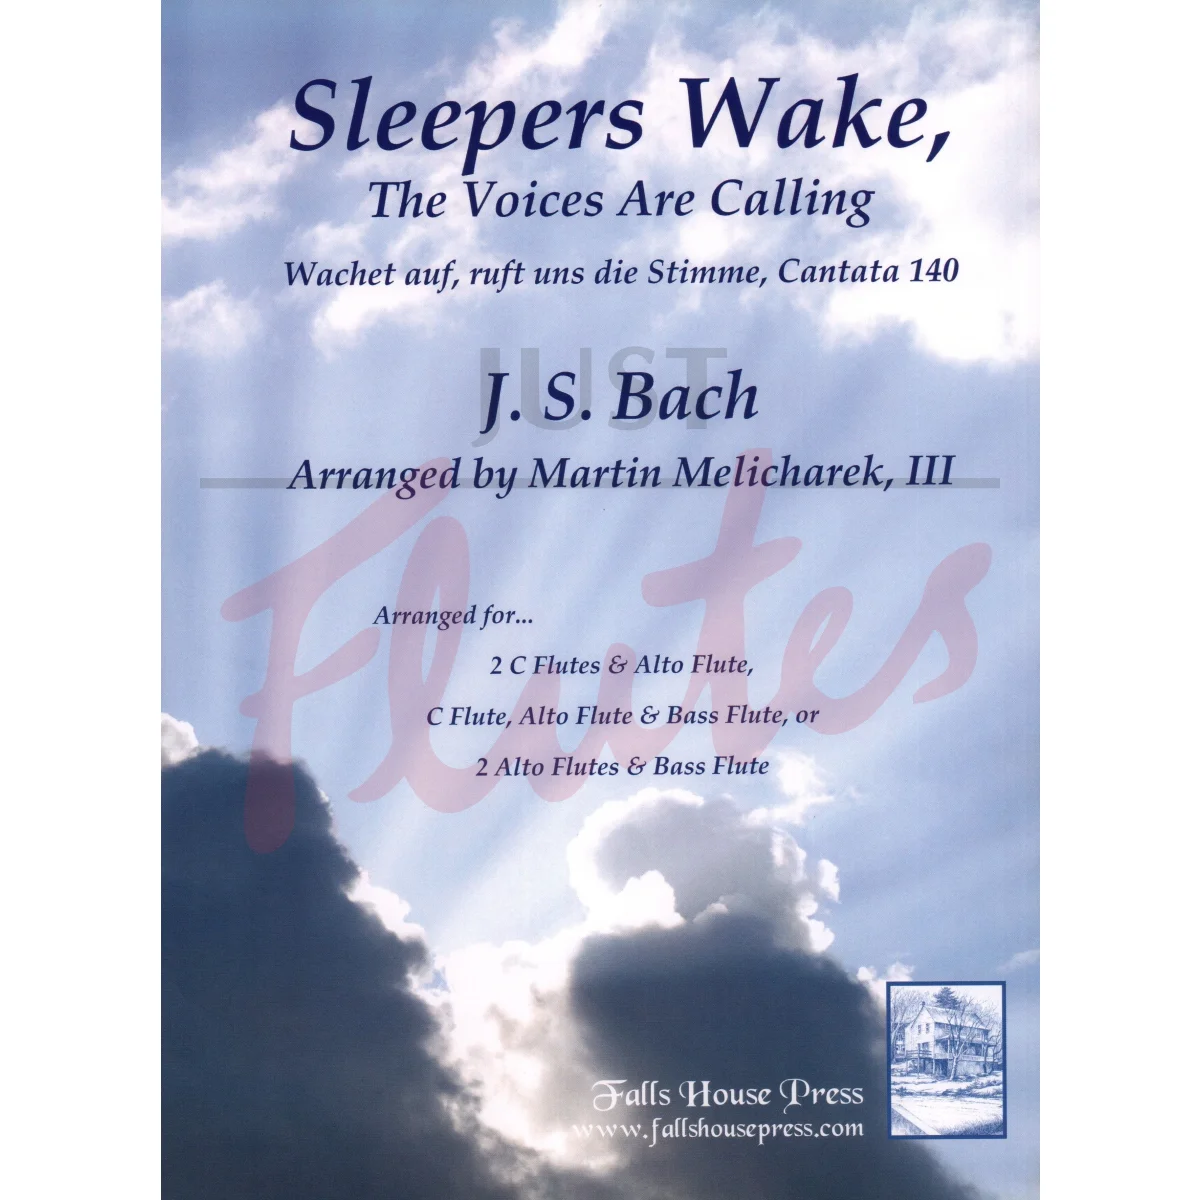 Sleepers Wake for Three Mixed Flutes